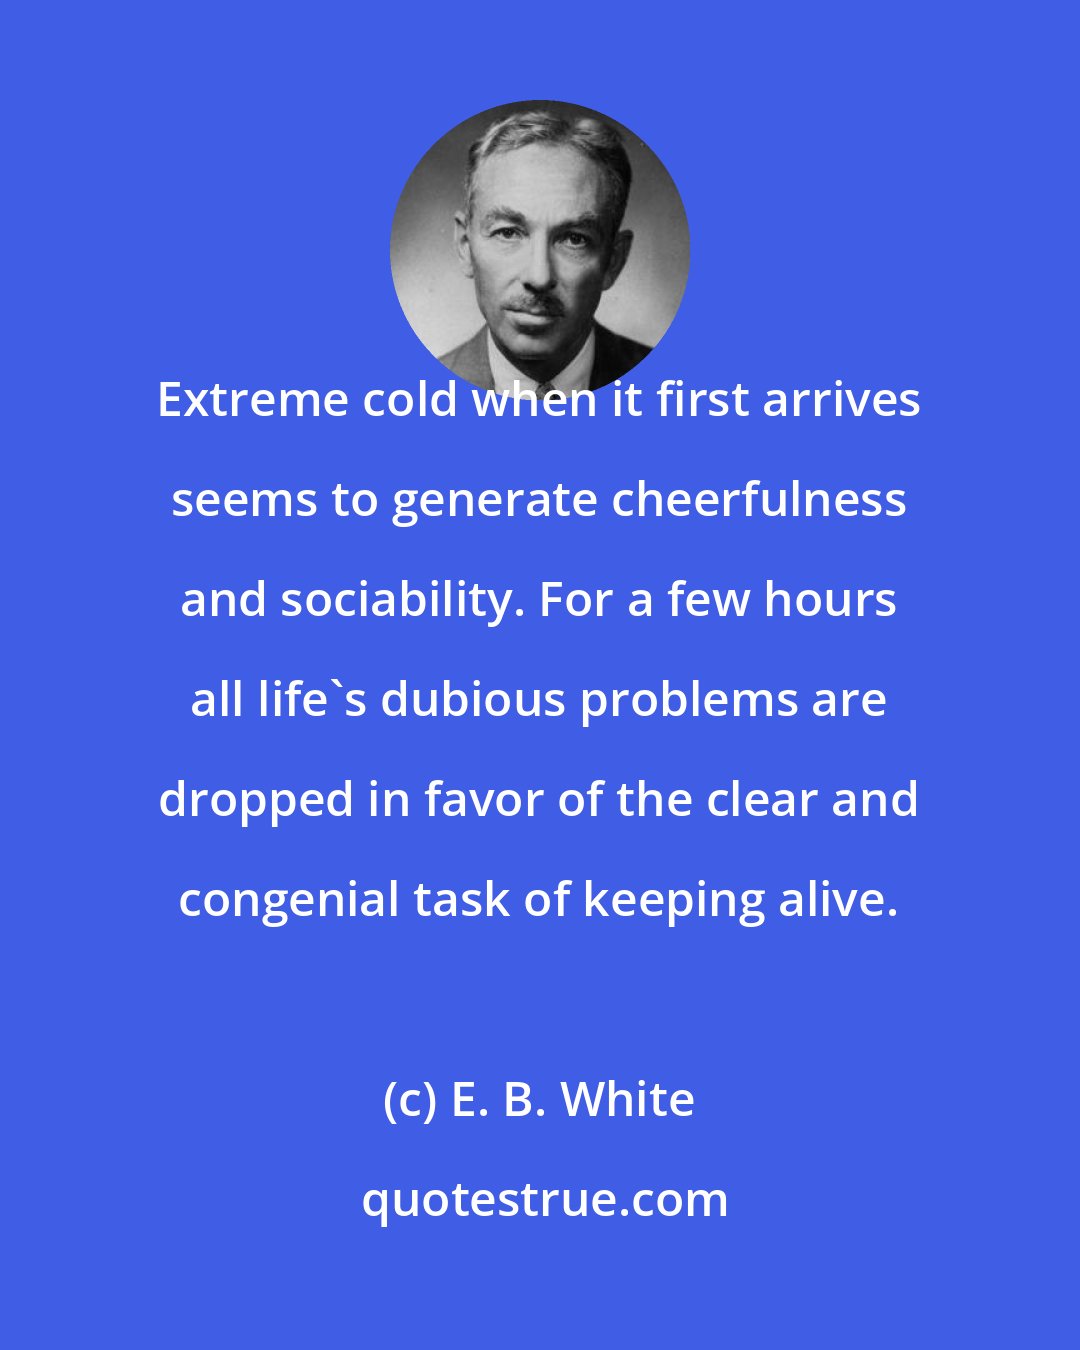 E. B. White: Extreme cold when it first arrives seems to generate cheerfulness and sociability. For a few hours all life's dubious problems are dropped in favor of the clear and congenial task of keeping alive.